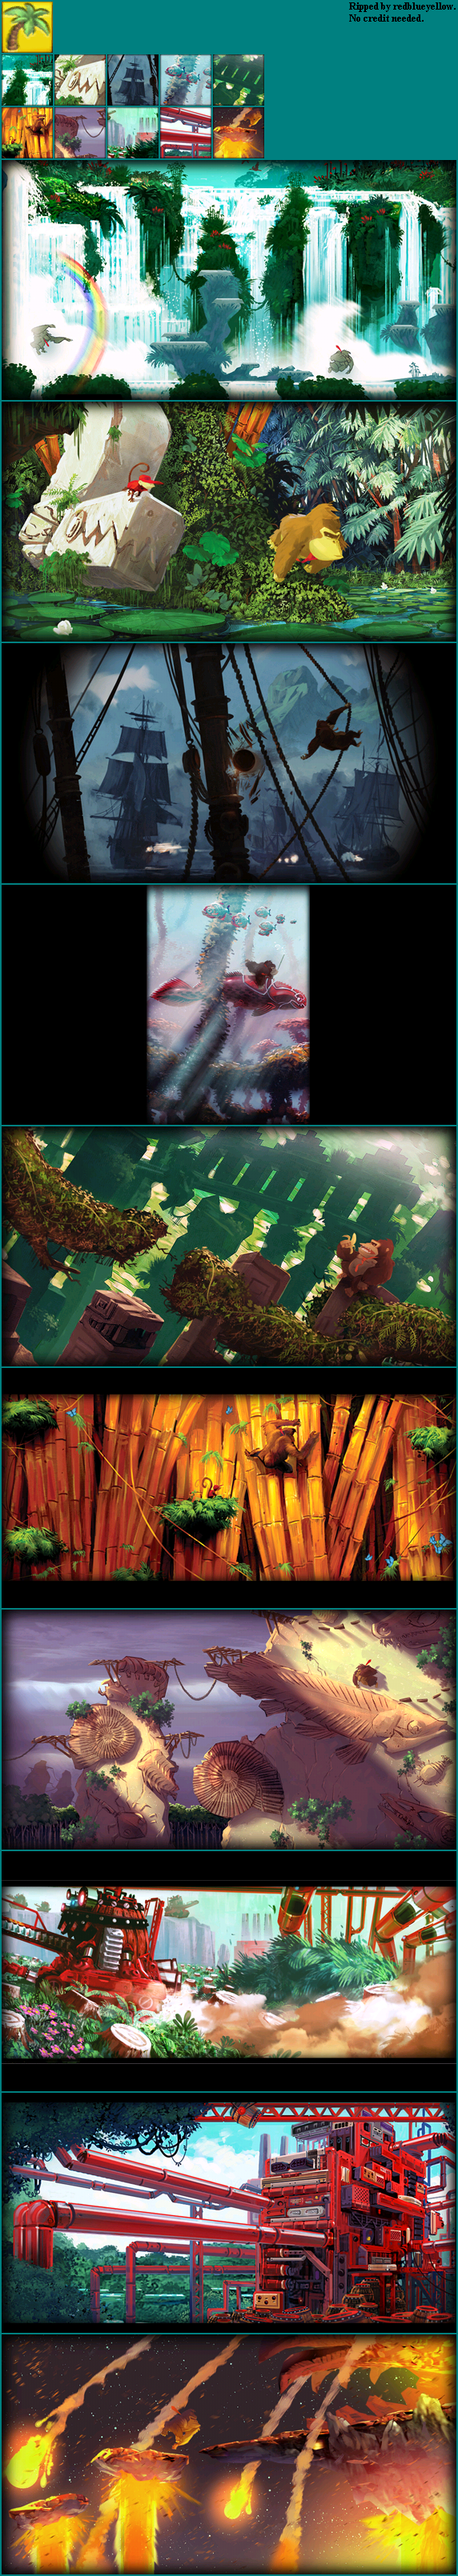 Donkey Kong Country Returns - Worlds Gallery